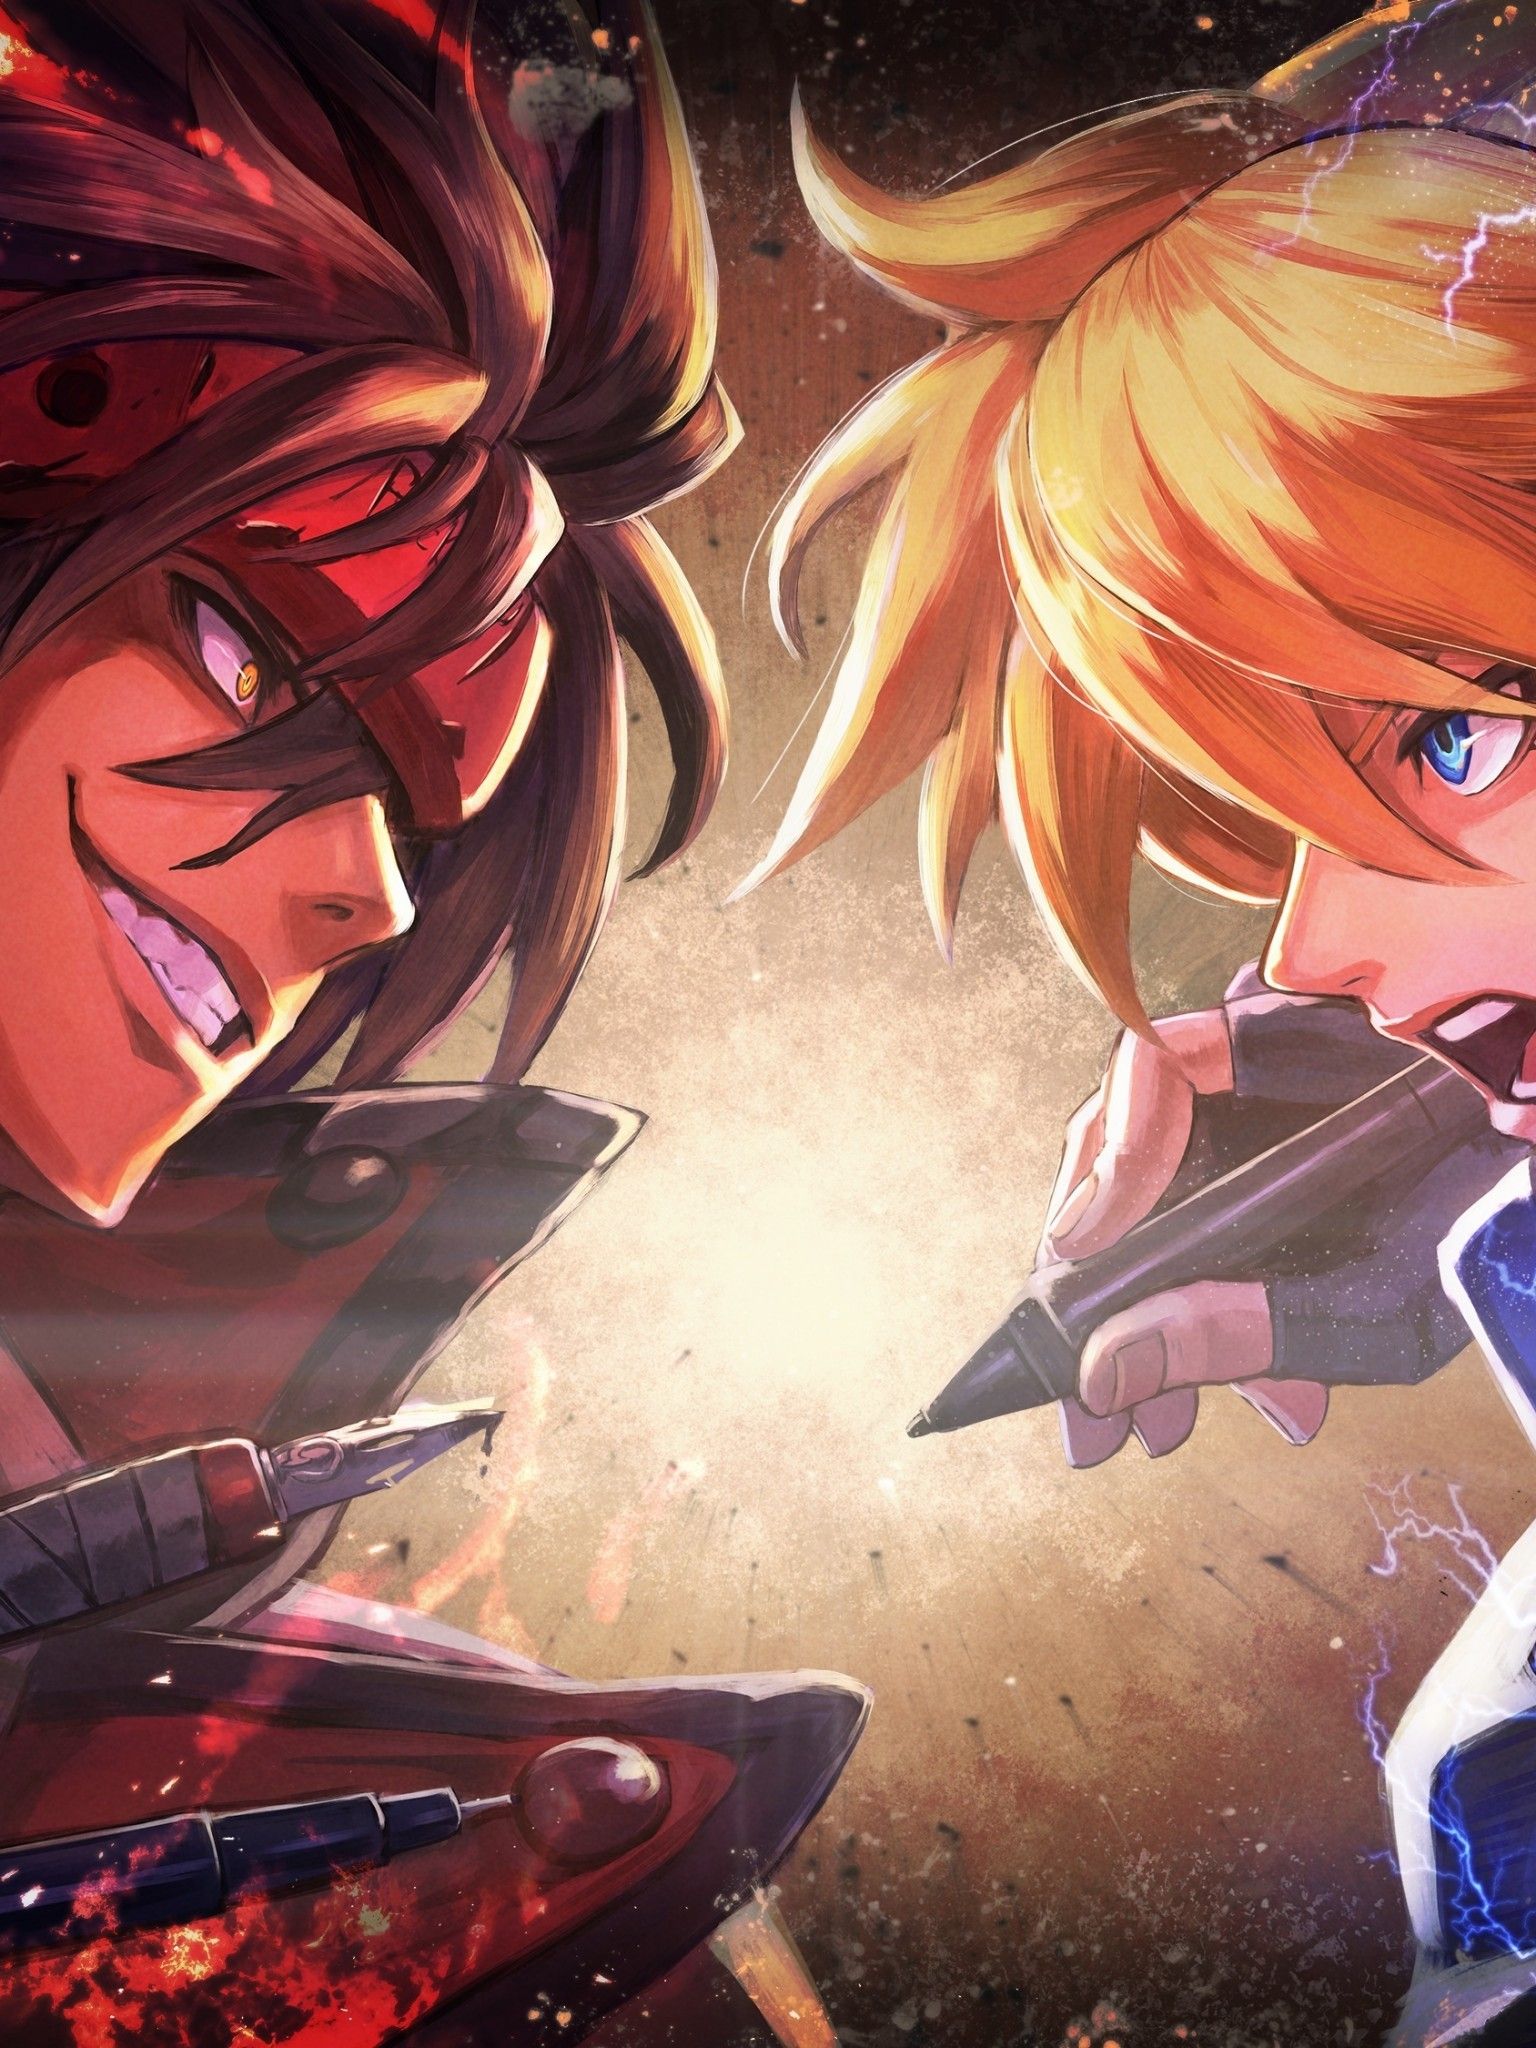 Sol Badguy, Guilty Gear Xrd, Ky Kiske, Anime Games, Gear Sol And Ky